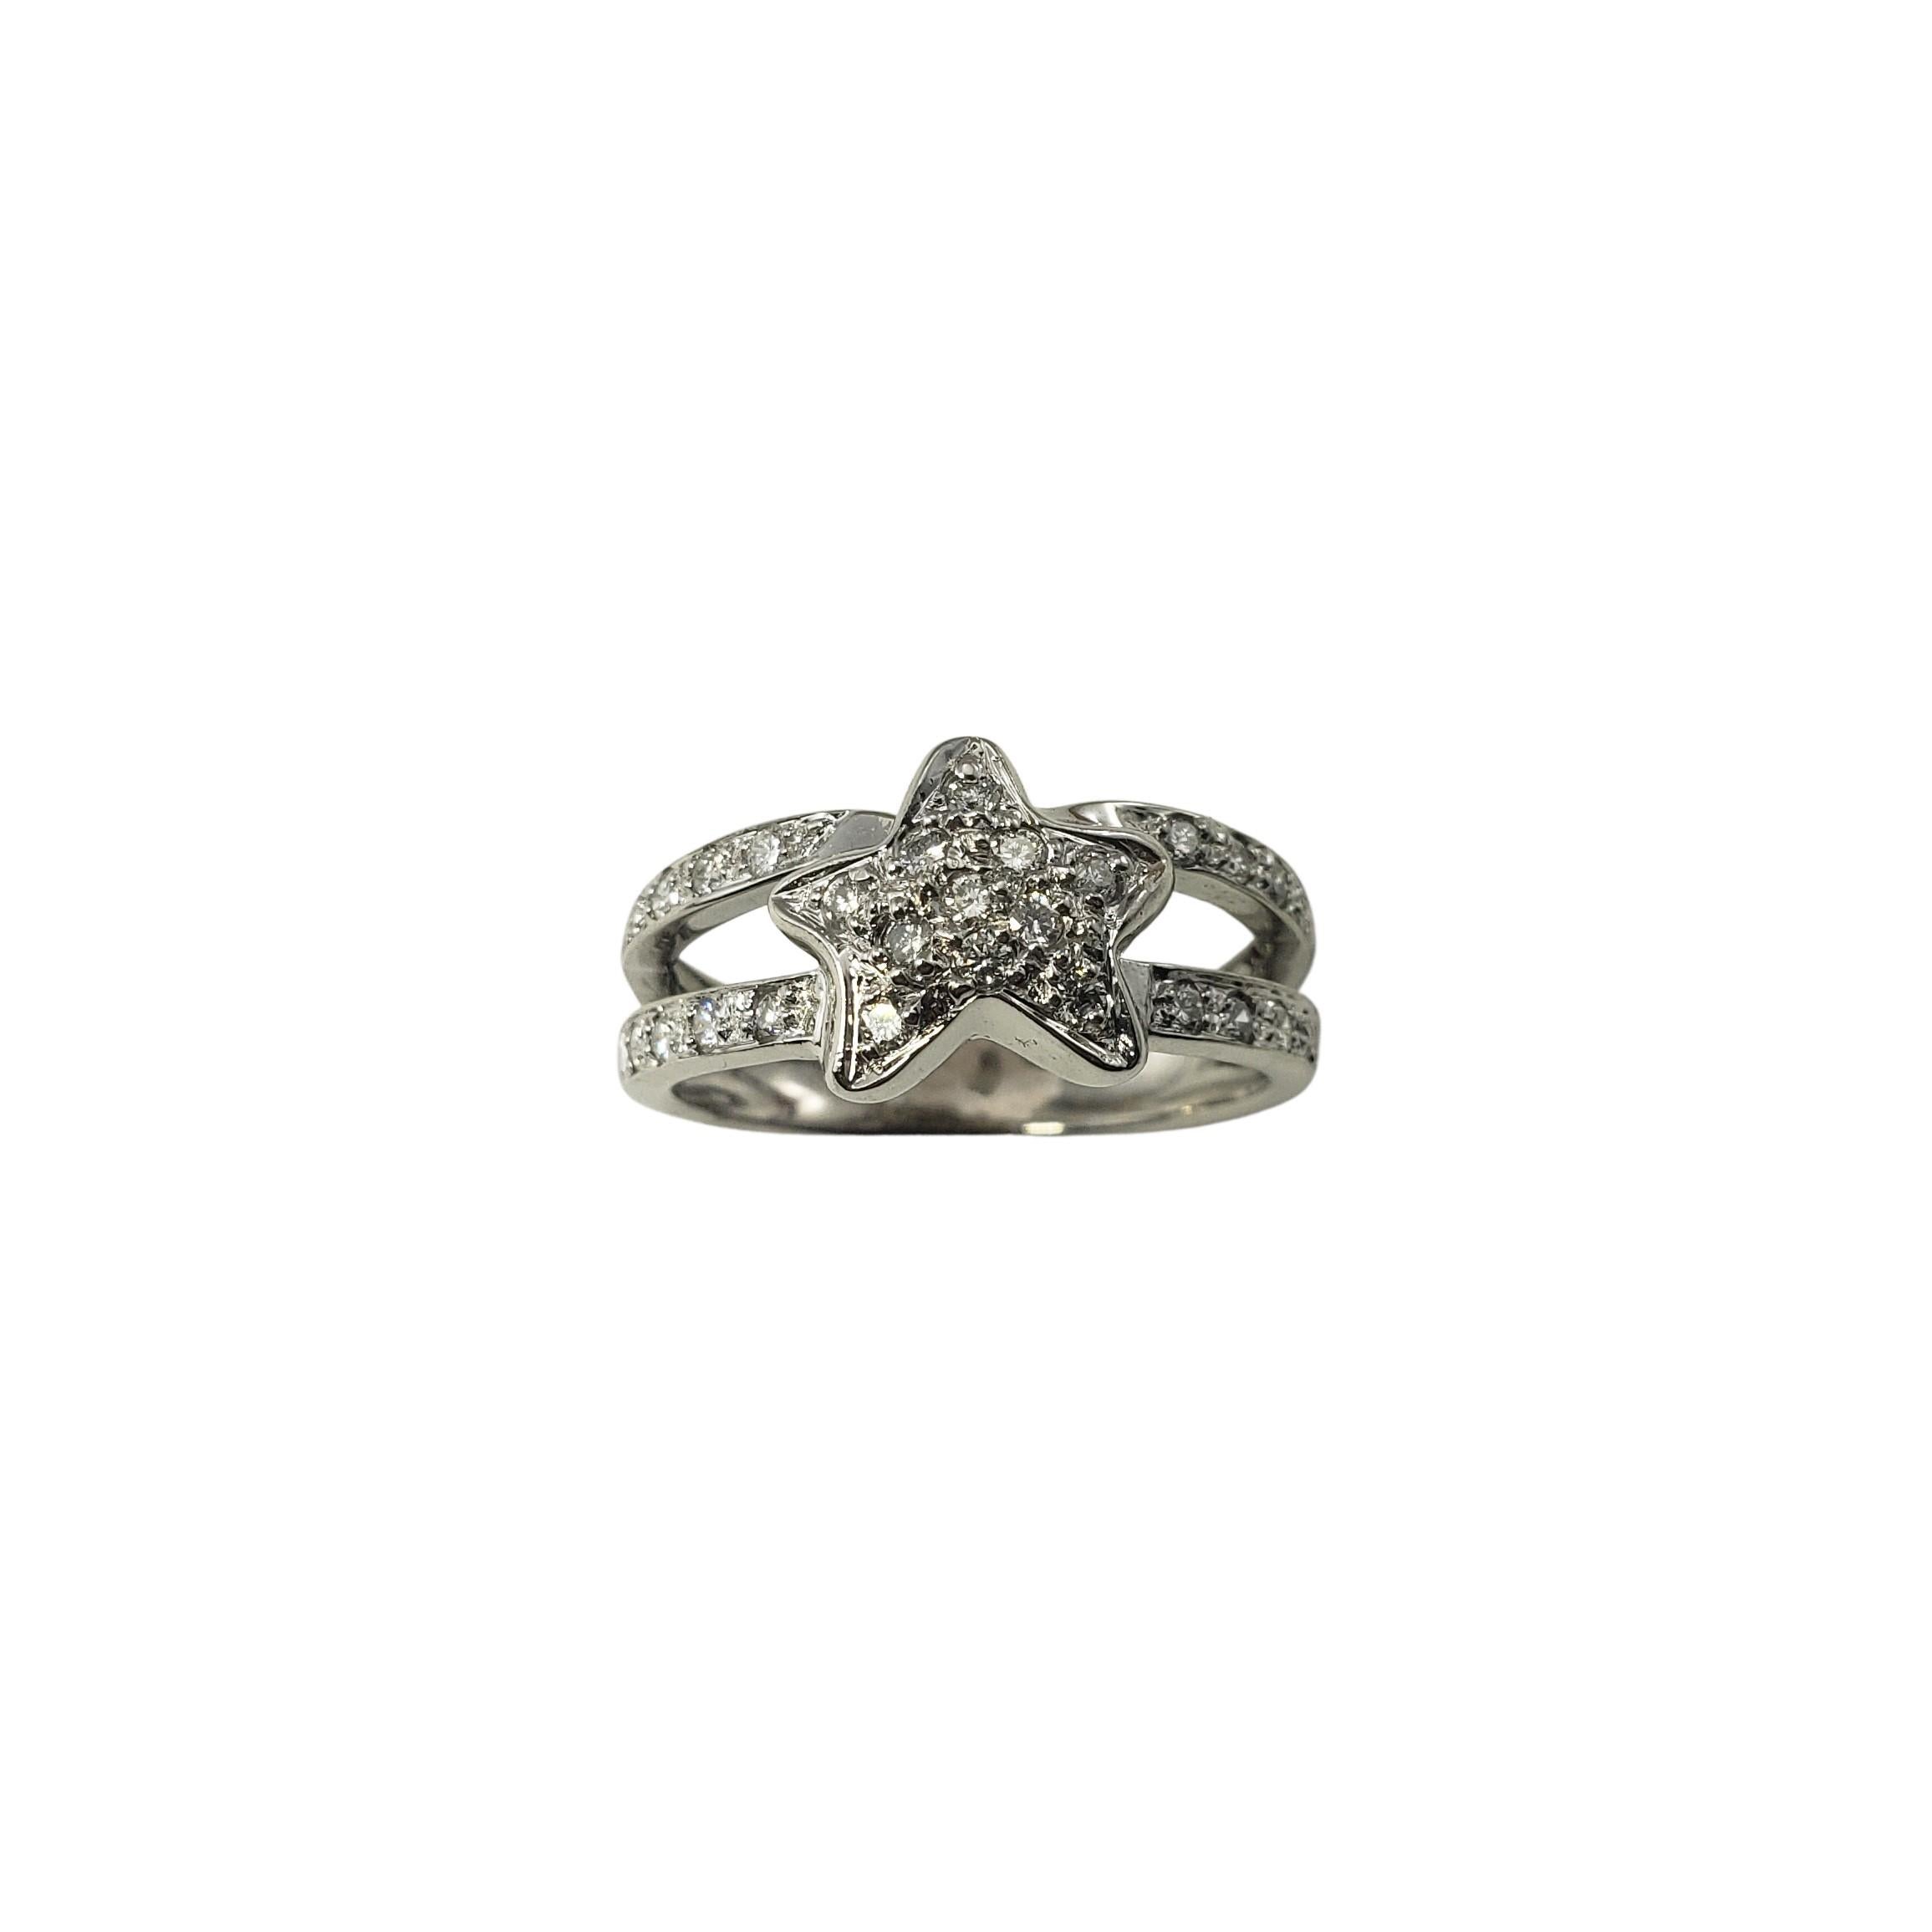 14 Karat White Gold and Diamond Star Ring Size 7.5-

This sparkling 14K white gold ring features 27 round brilliant cut diamonds set in a beautifully detailed star design.    Width:  9 mm.
Shank:  4 mm.

Approximate total diamond weight:  .30